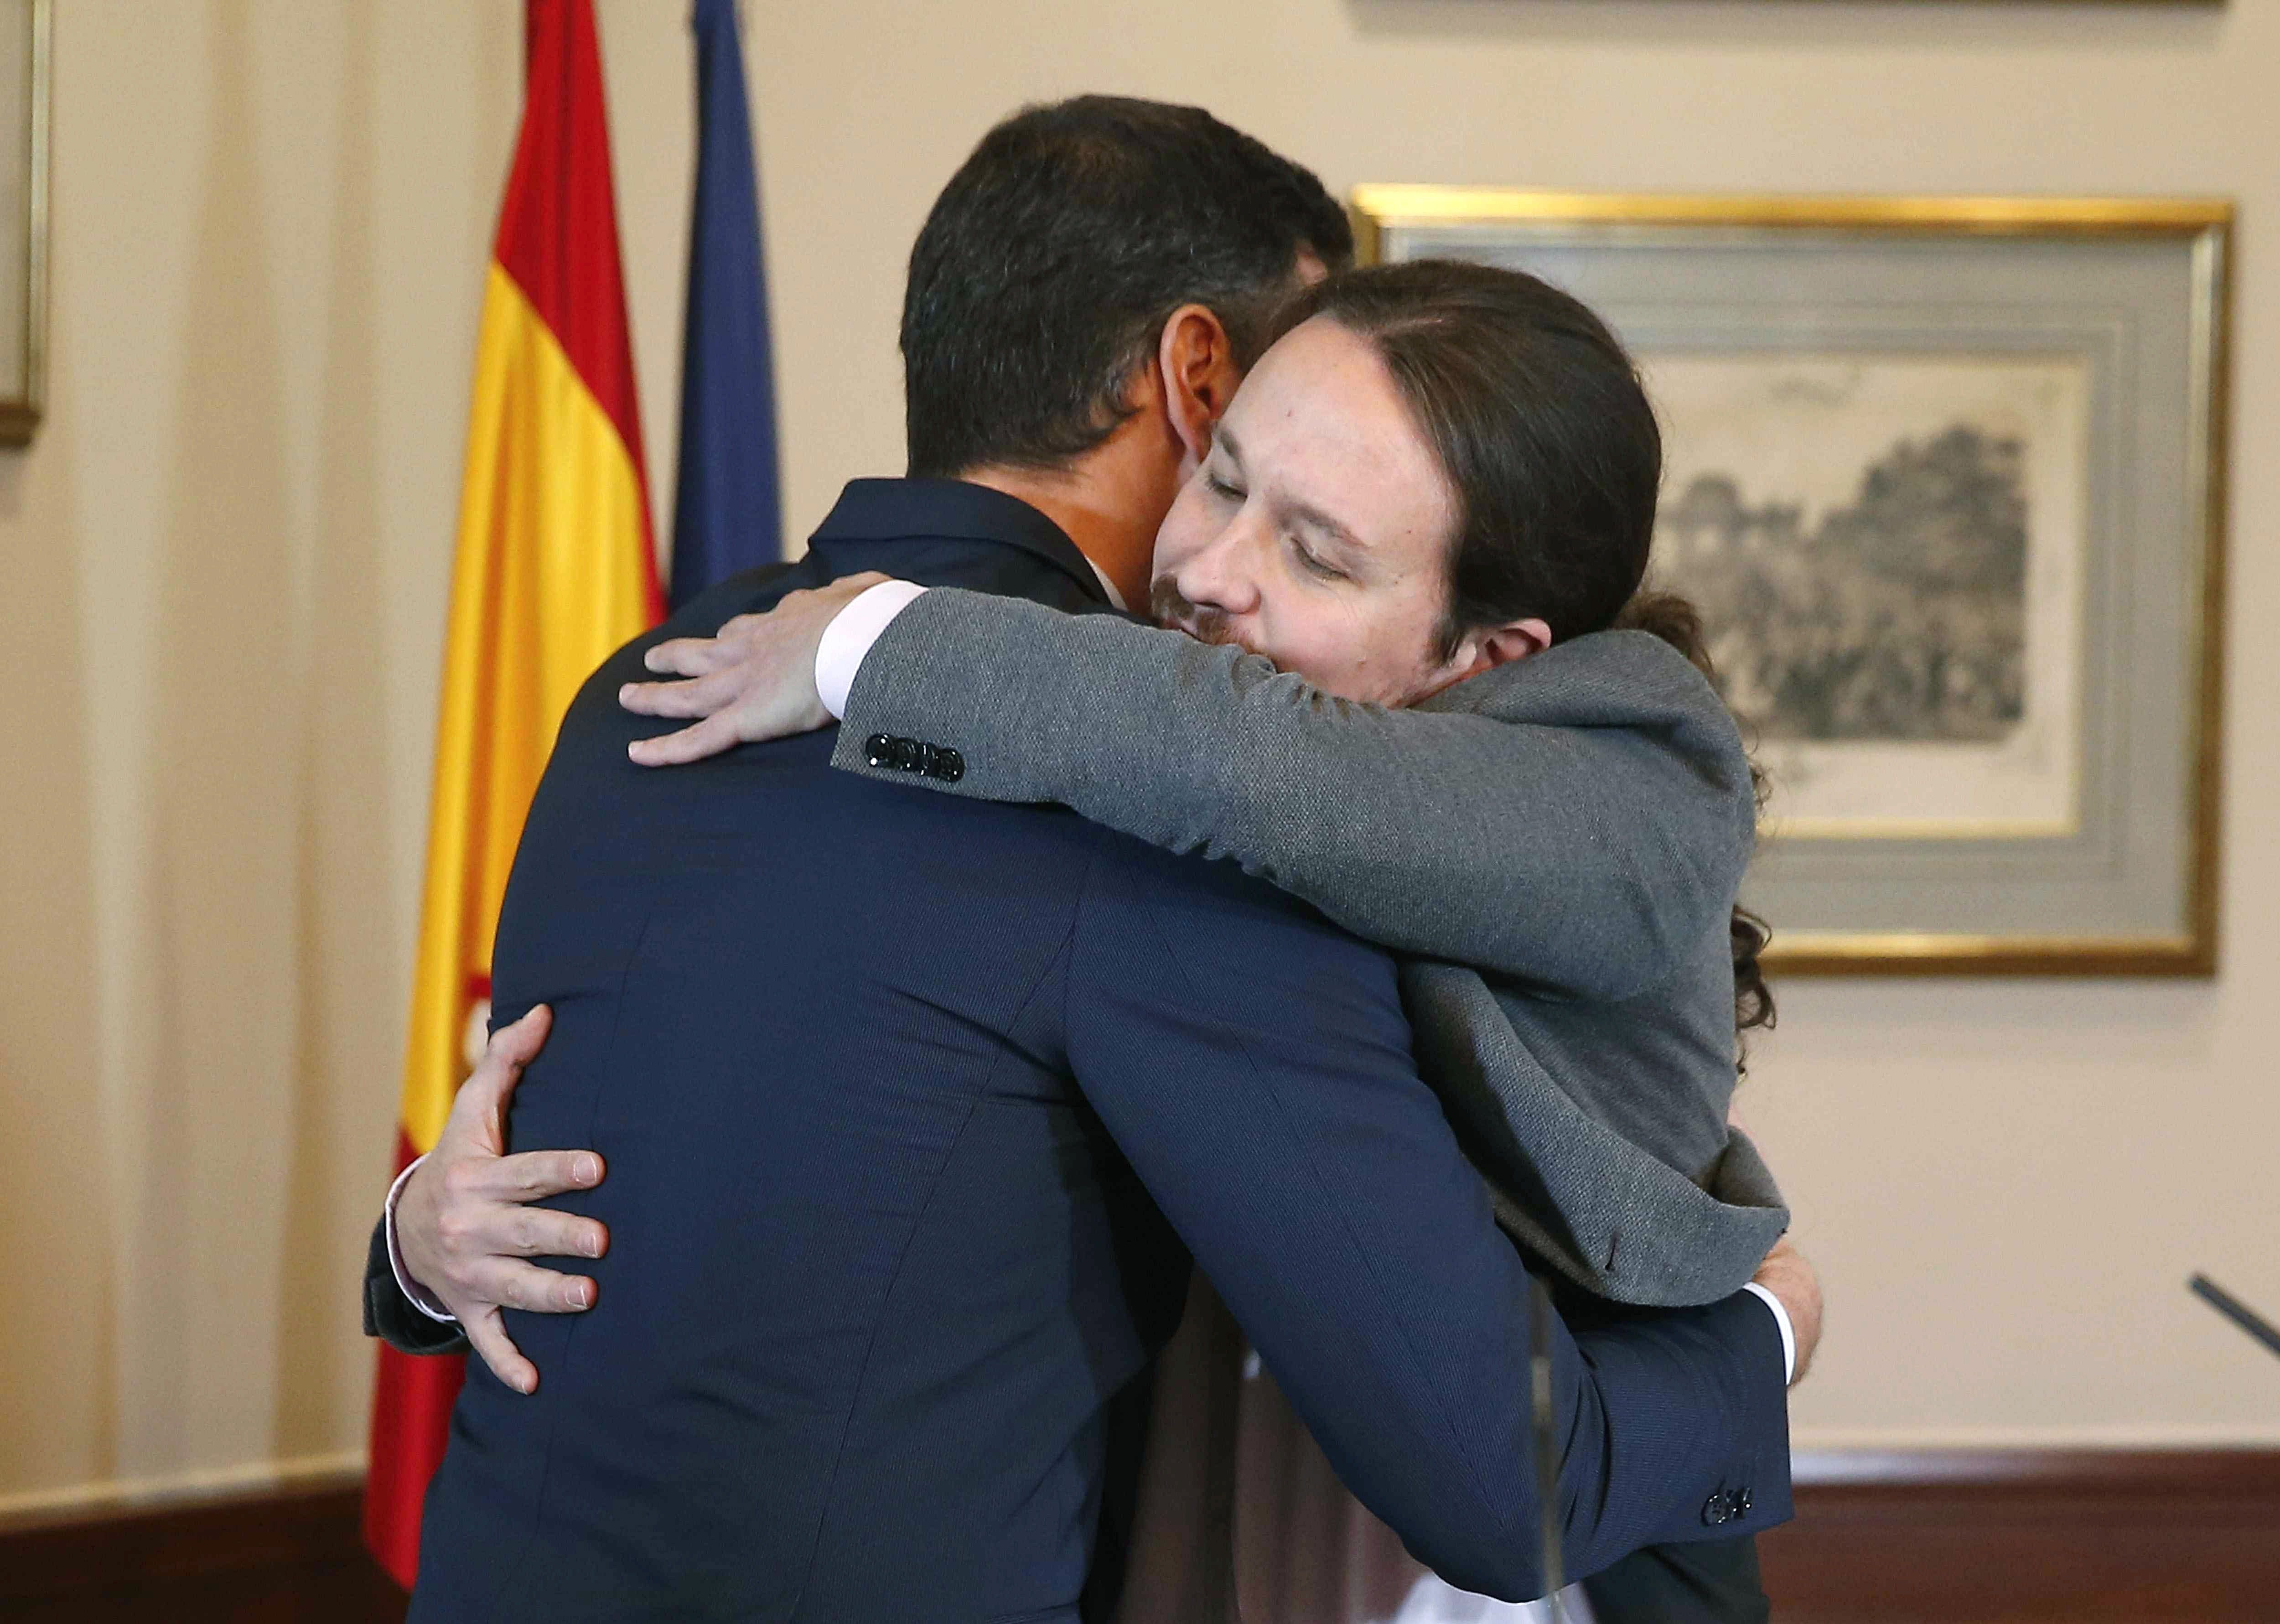 PSOE and Podemos sign preliminary agreement for coalition government in Spain